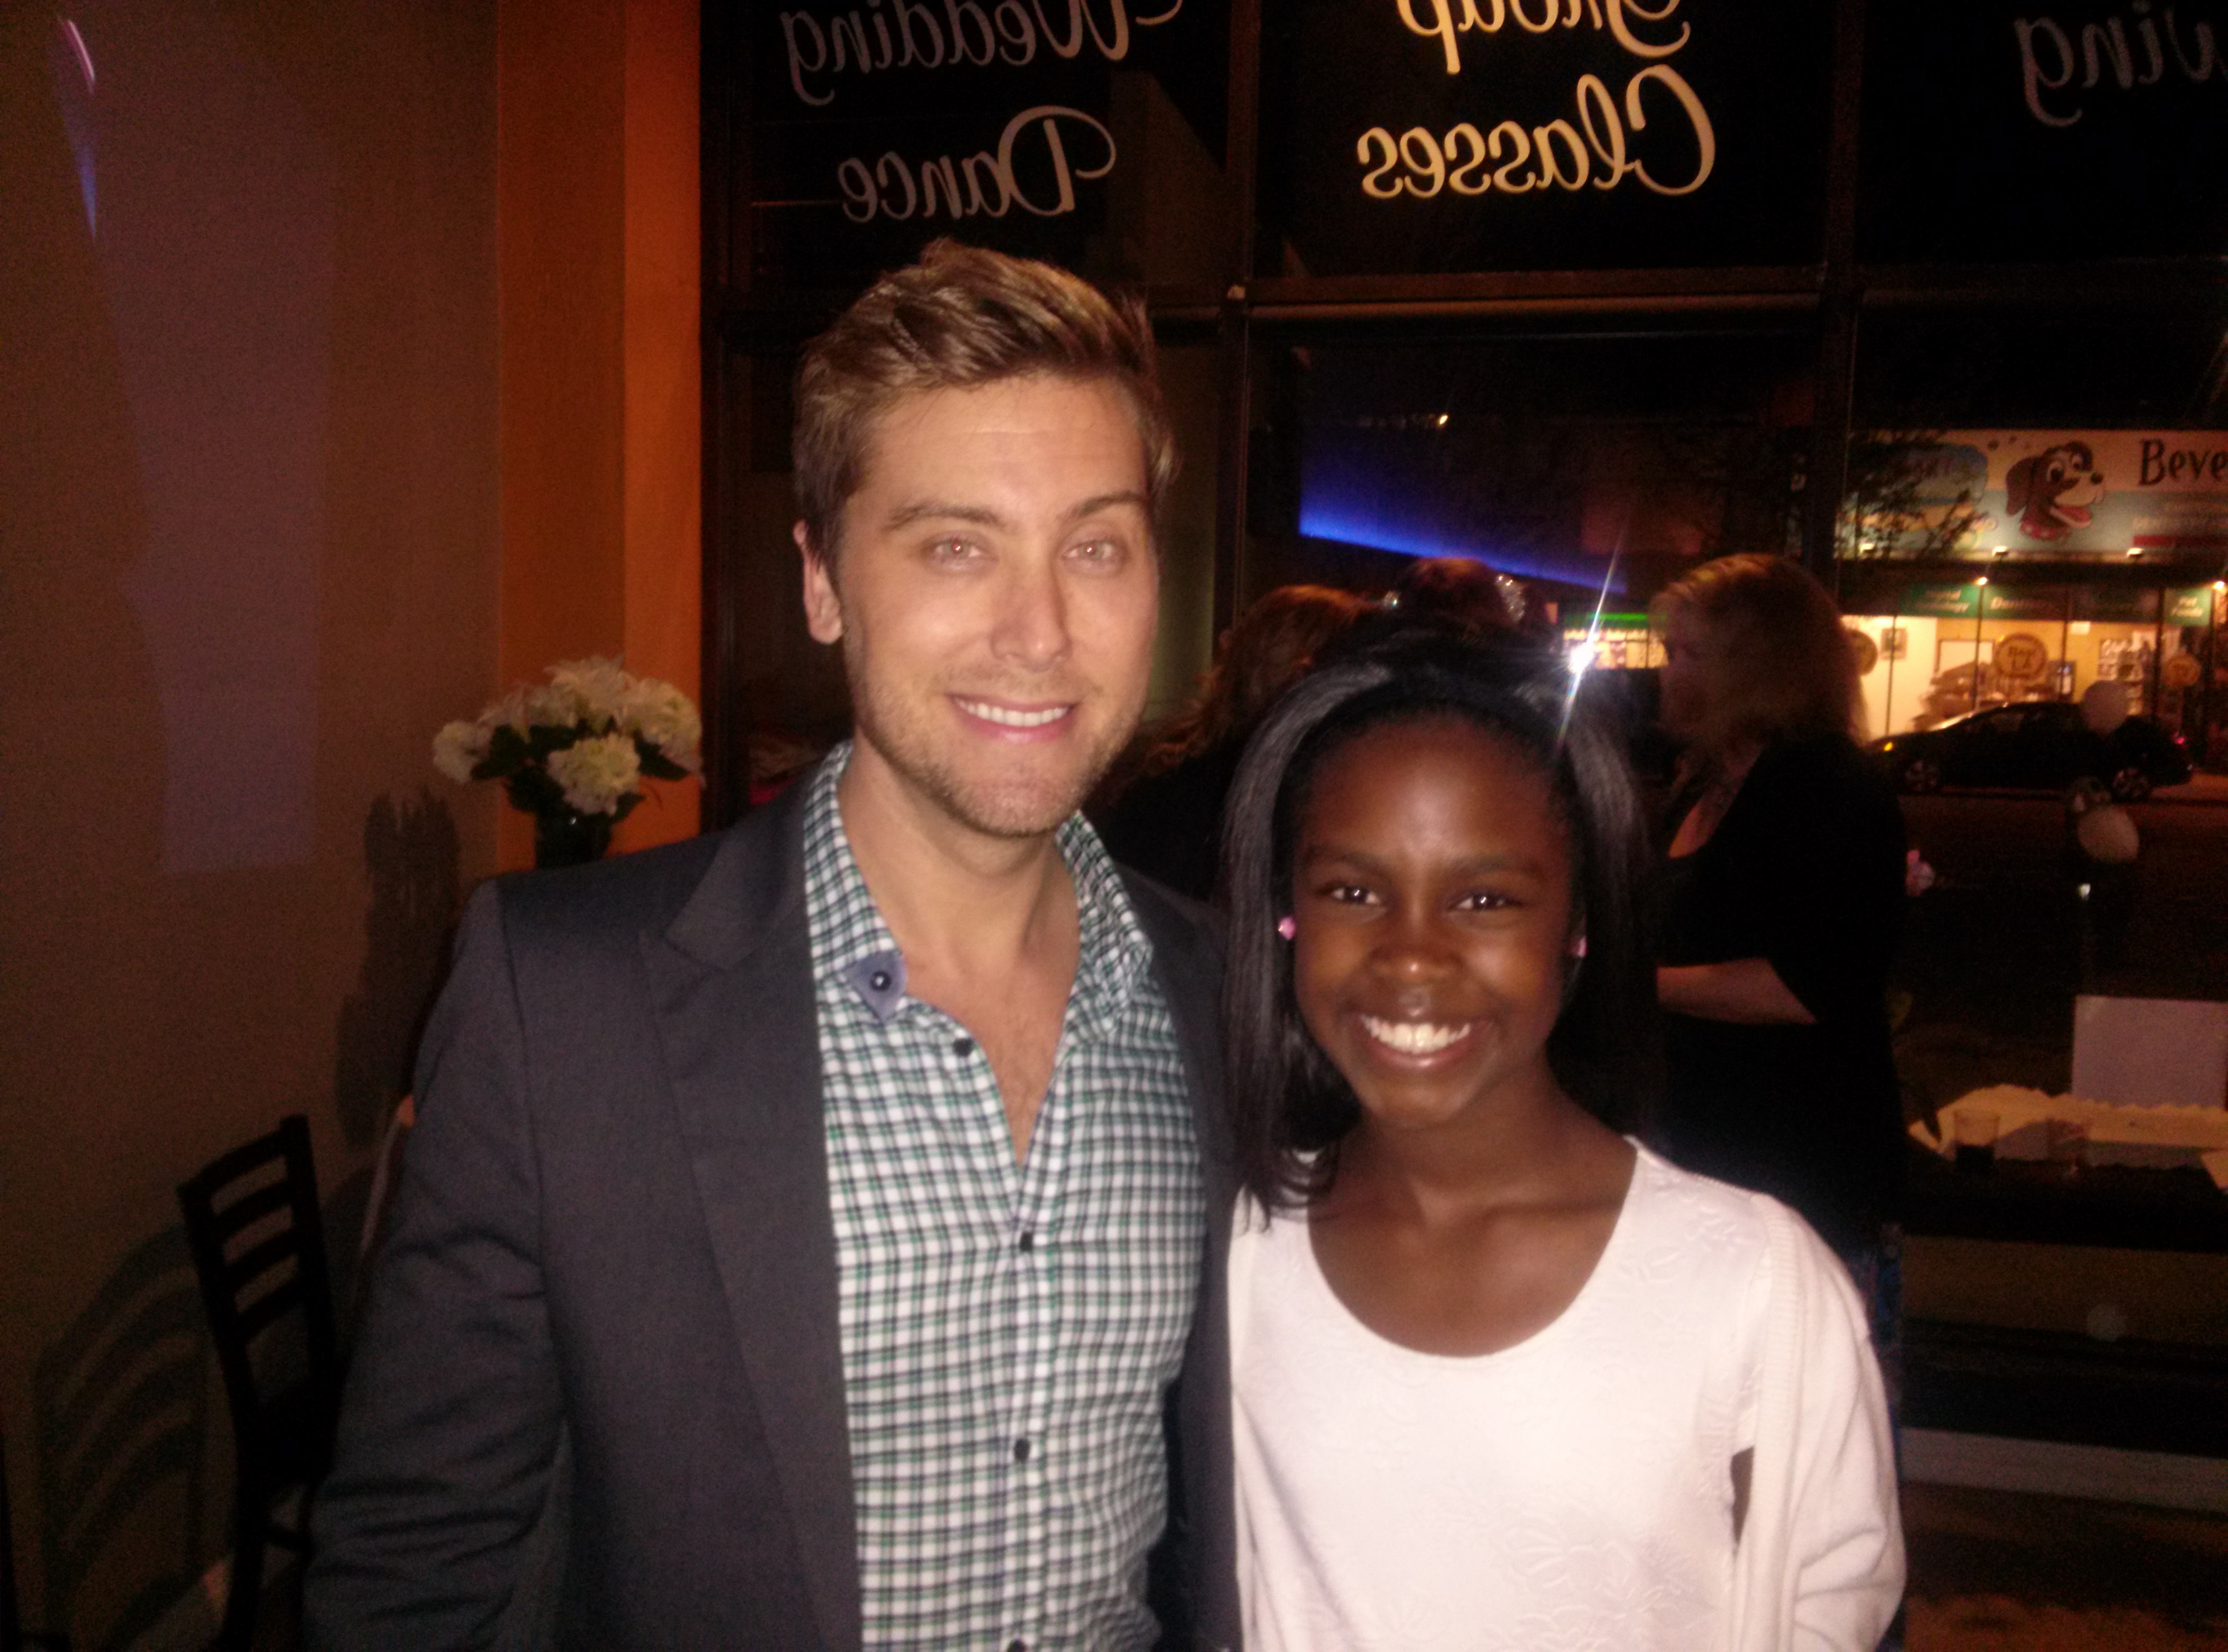 Lexi with Lance at the LA Ballroom event.